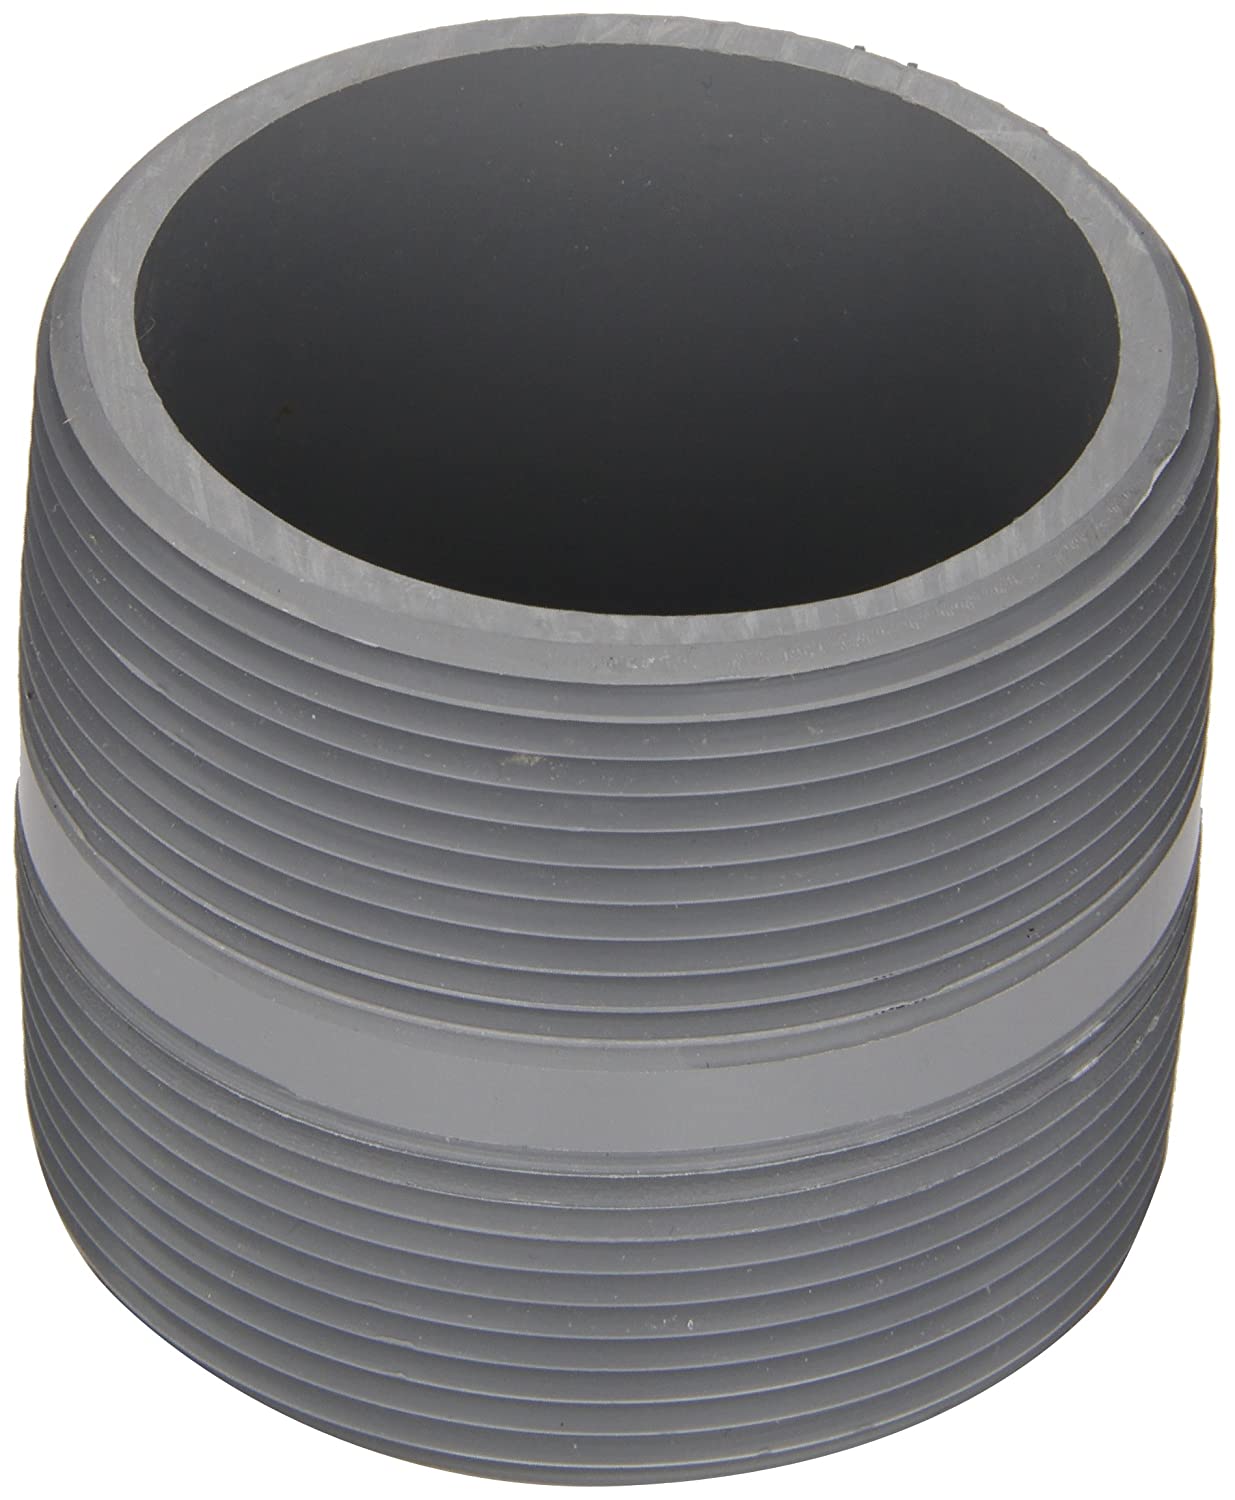 Spears 884-020C - CPVC Pipe Fitting, Nipple, Schedule 80, Gray, 1" NPT Male, 2" Length